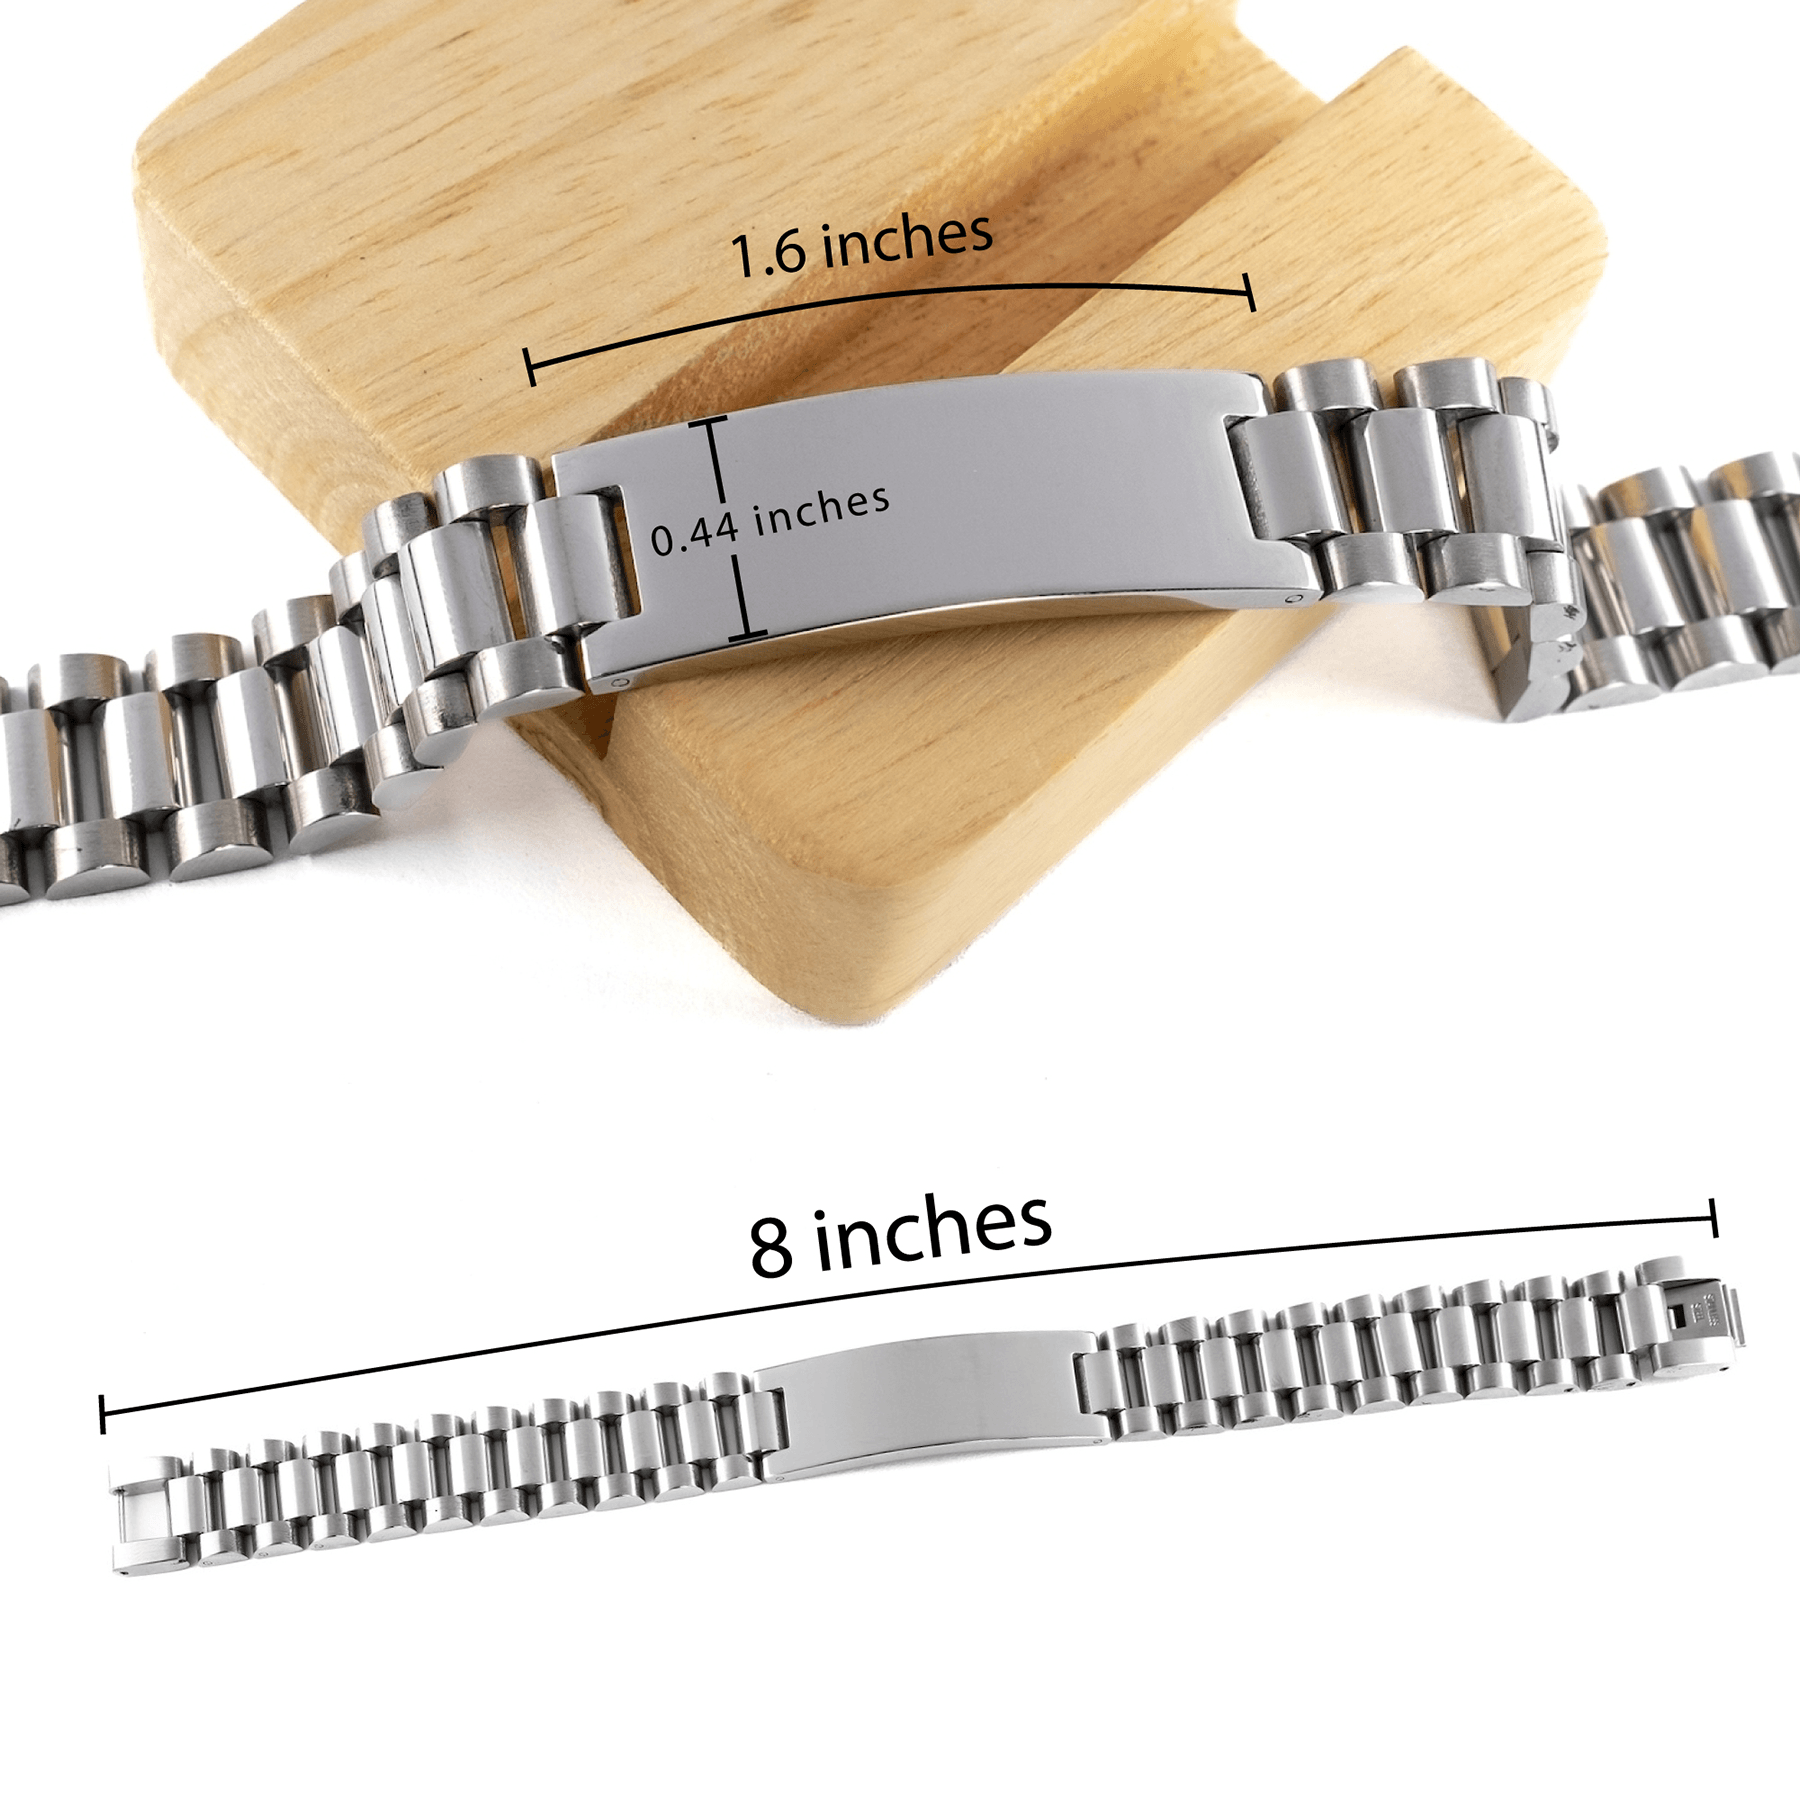 Remarkable Farmer Gifts, Your dedication and hard work, Inspirational Birthday Christmas Unique Ladder Stainless Steel Bracelet For Farmer, Coworkers, Men, Women, Friends - Mallard Moon Gift Shop